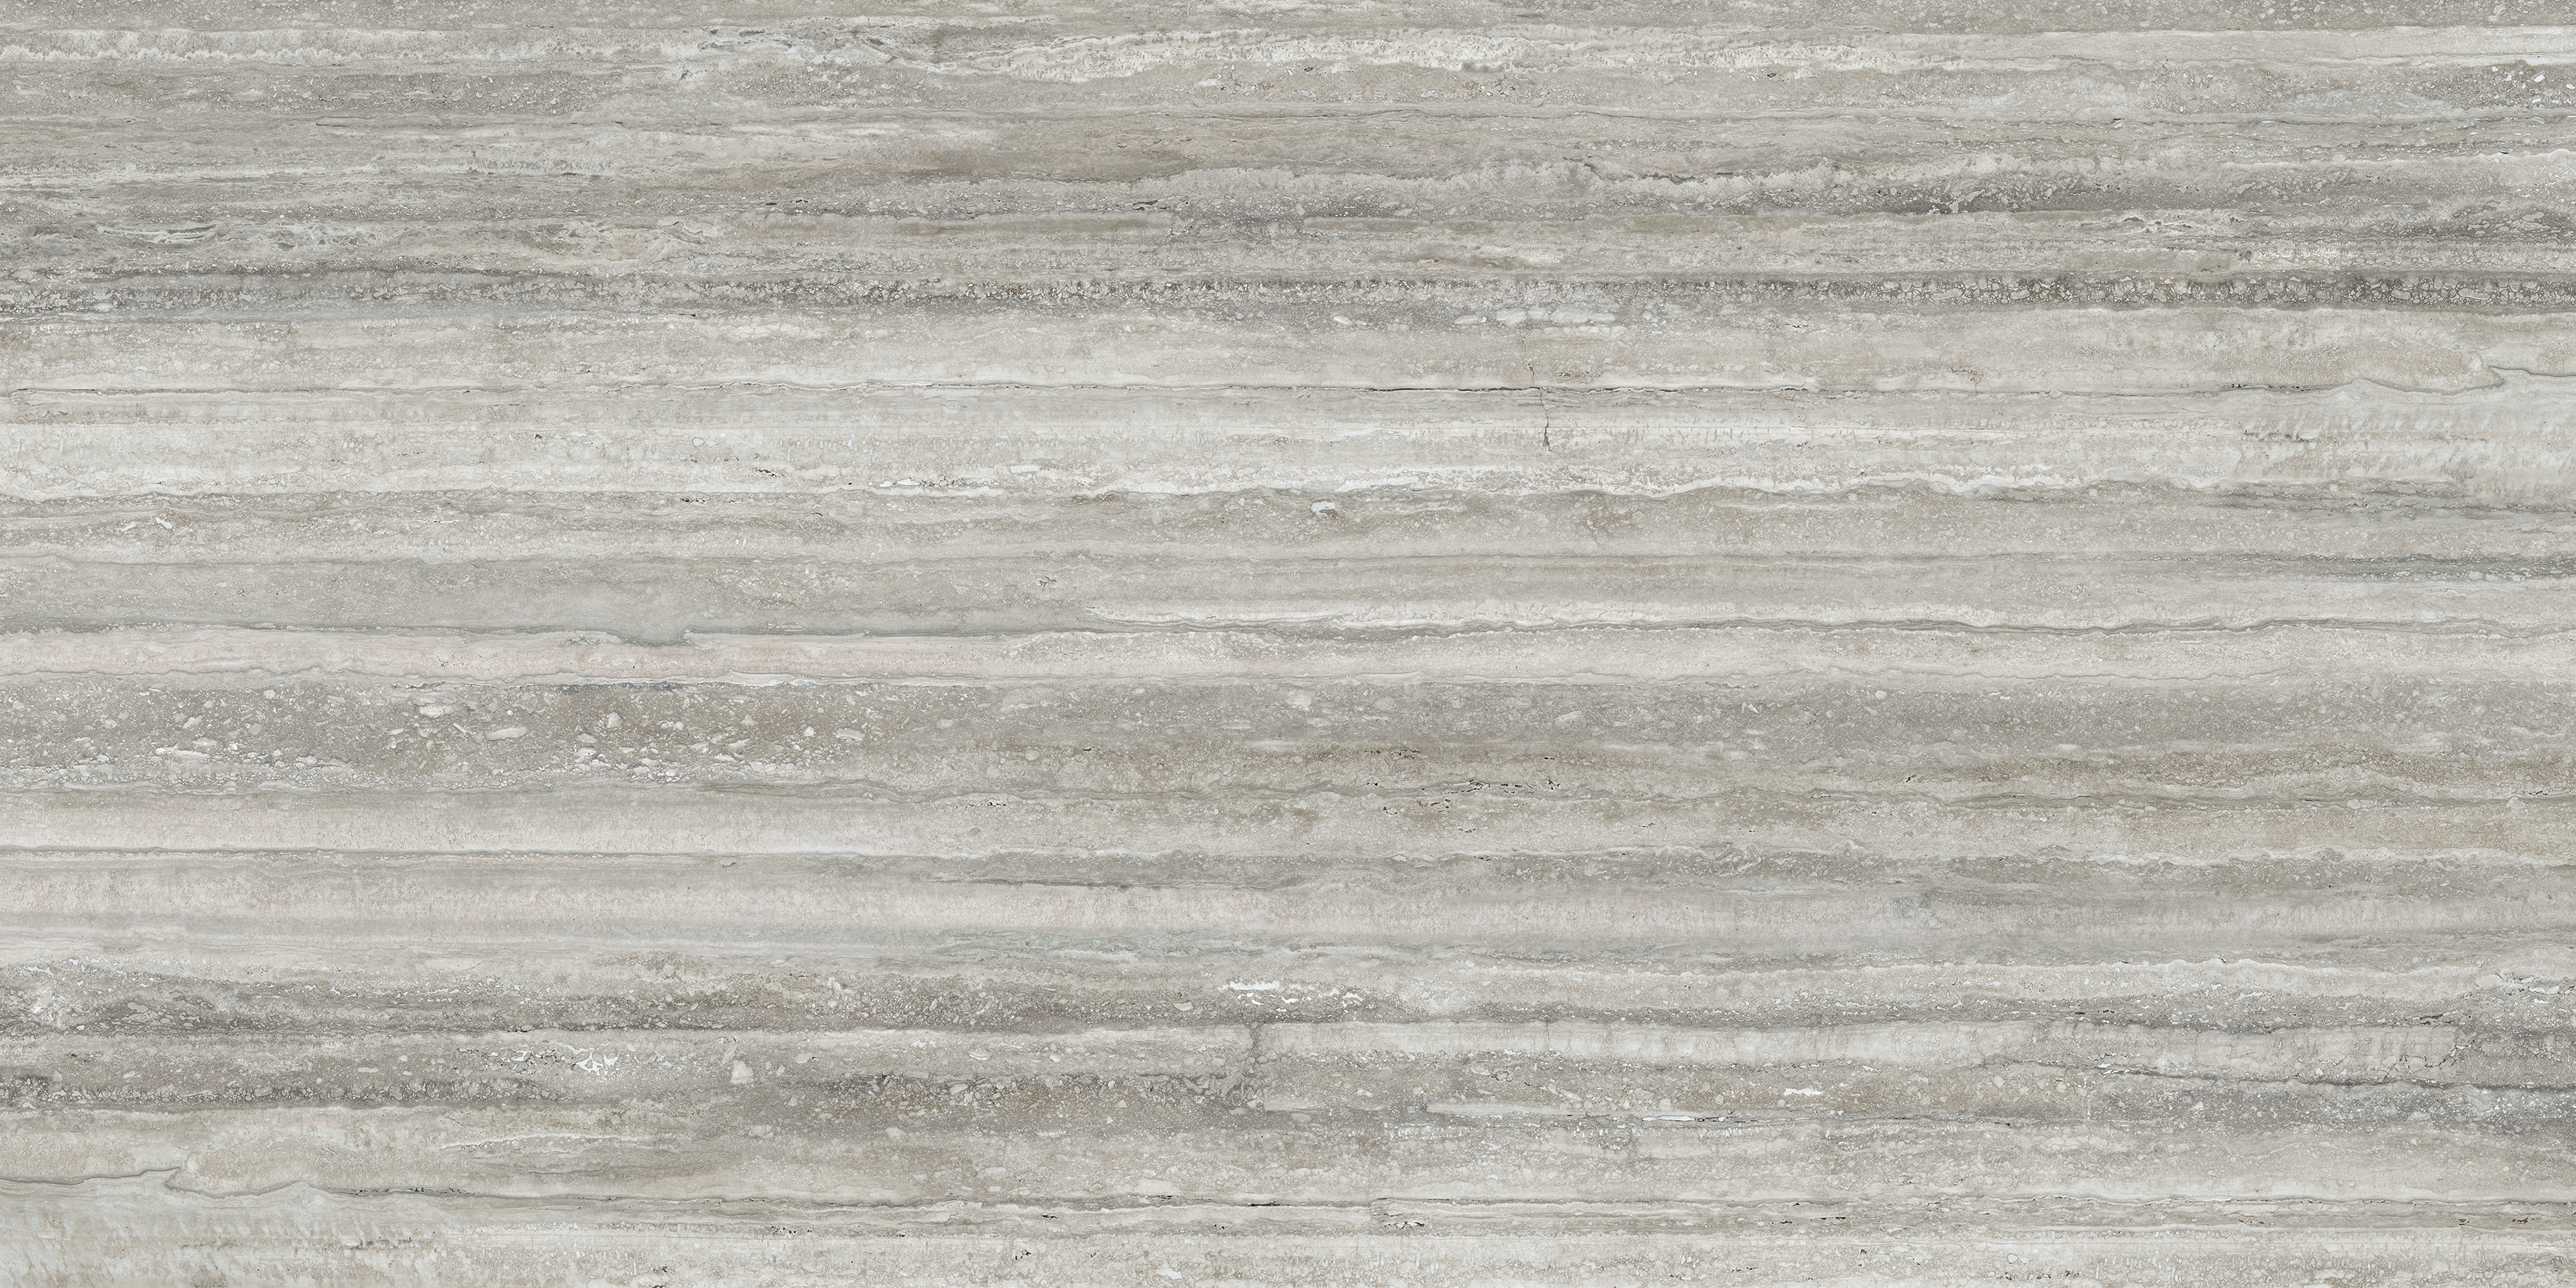 travertino instrata pattern glazed porcelain field tile from la marca anatolia collection distributed by surface group international polished finish rectified edge 24x48 rectangle shape